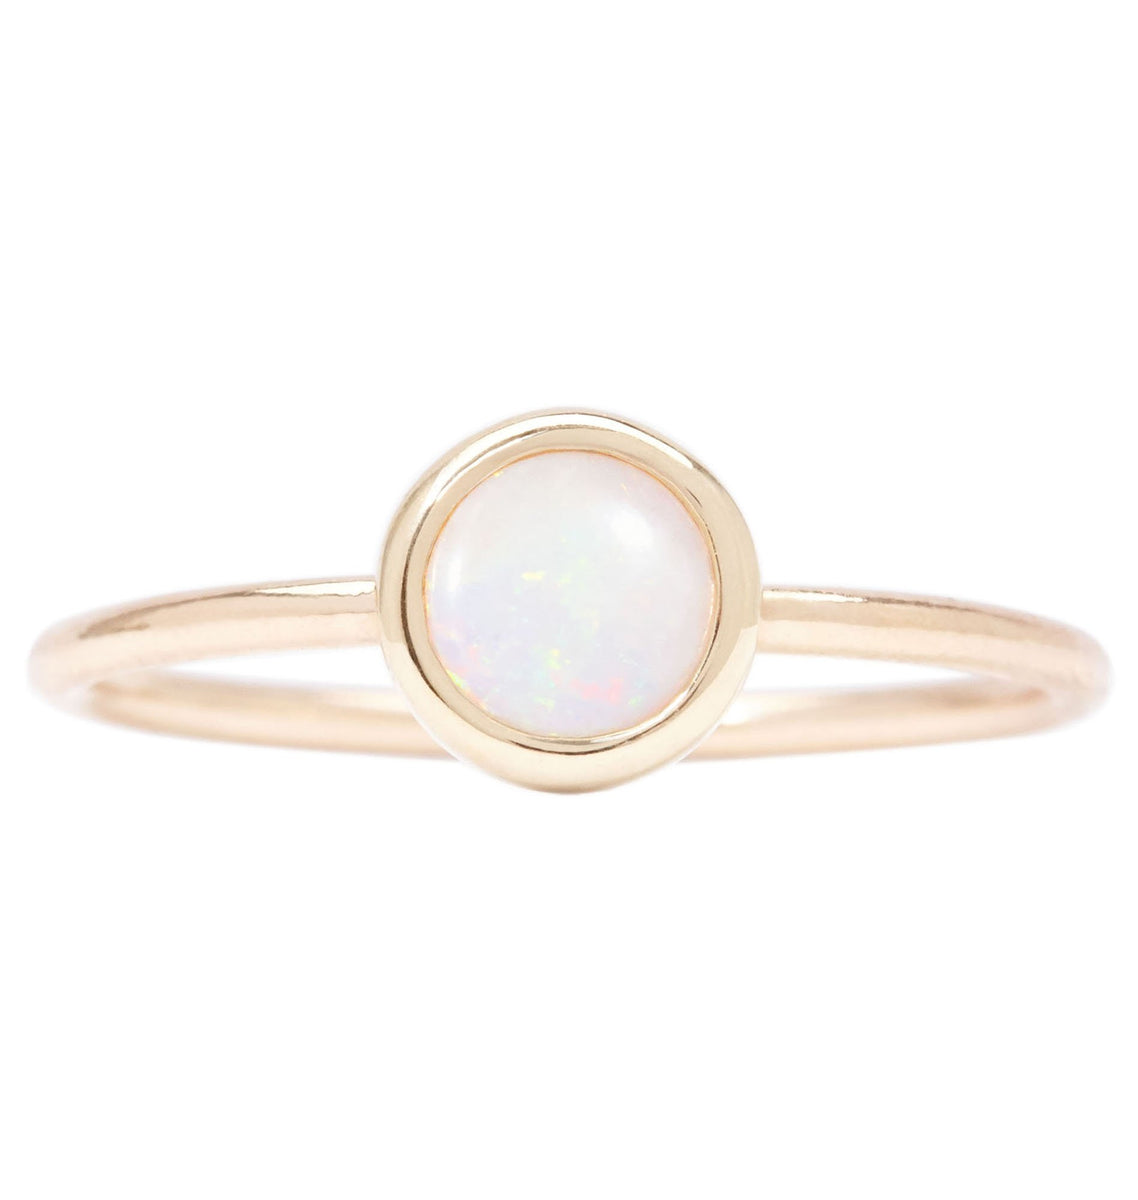 Opal Stacking Ring - Dainty Gold Opal Ring | Helen Ficalora